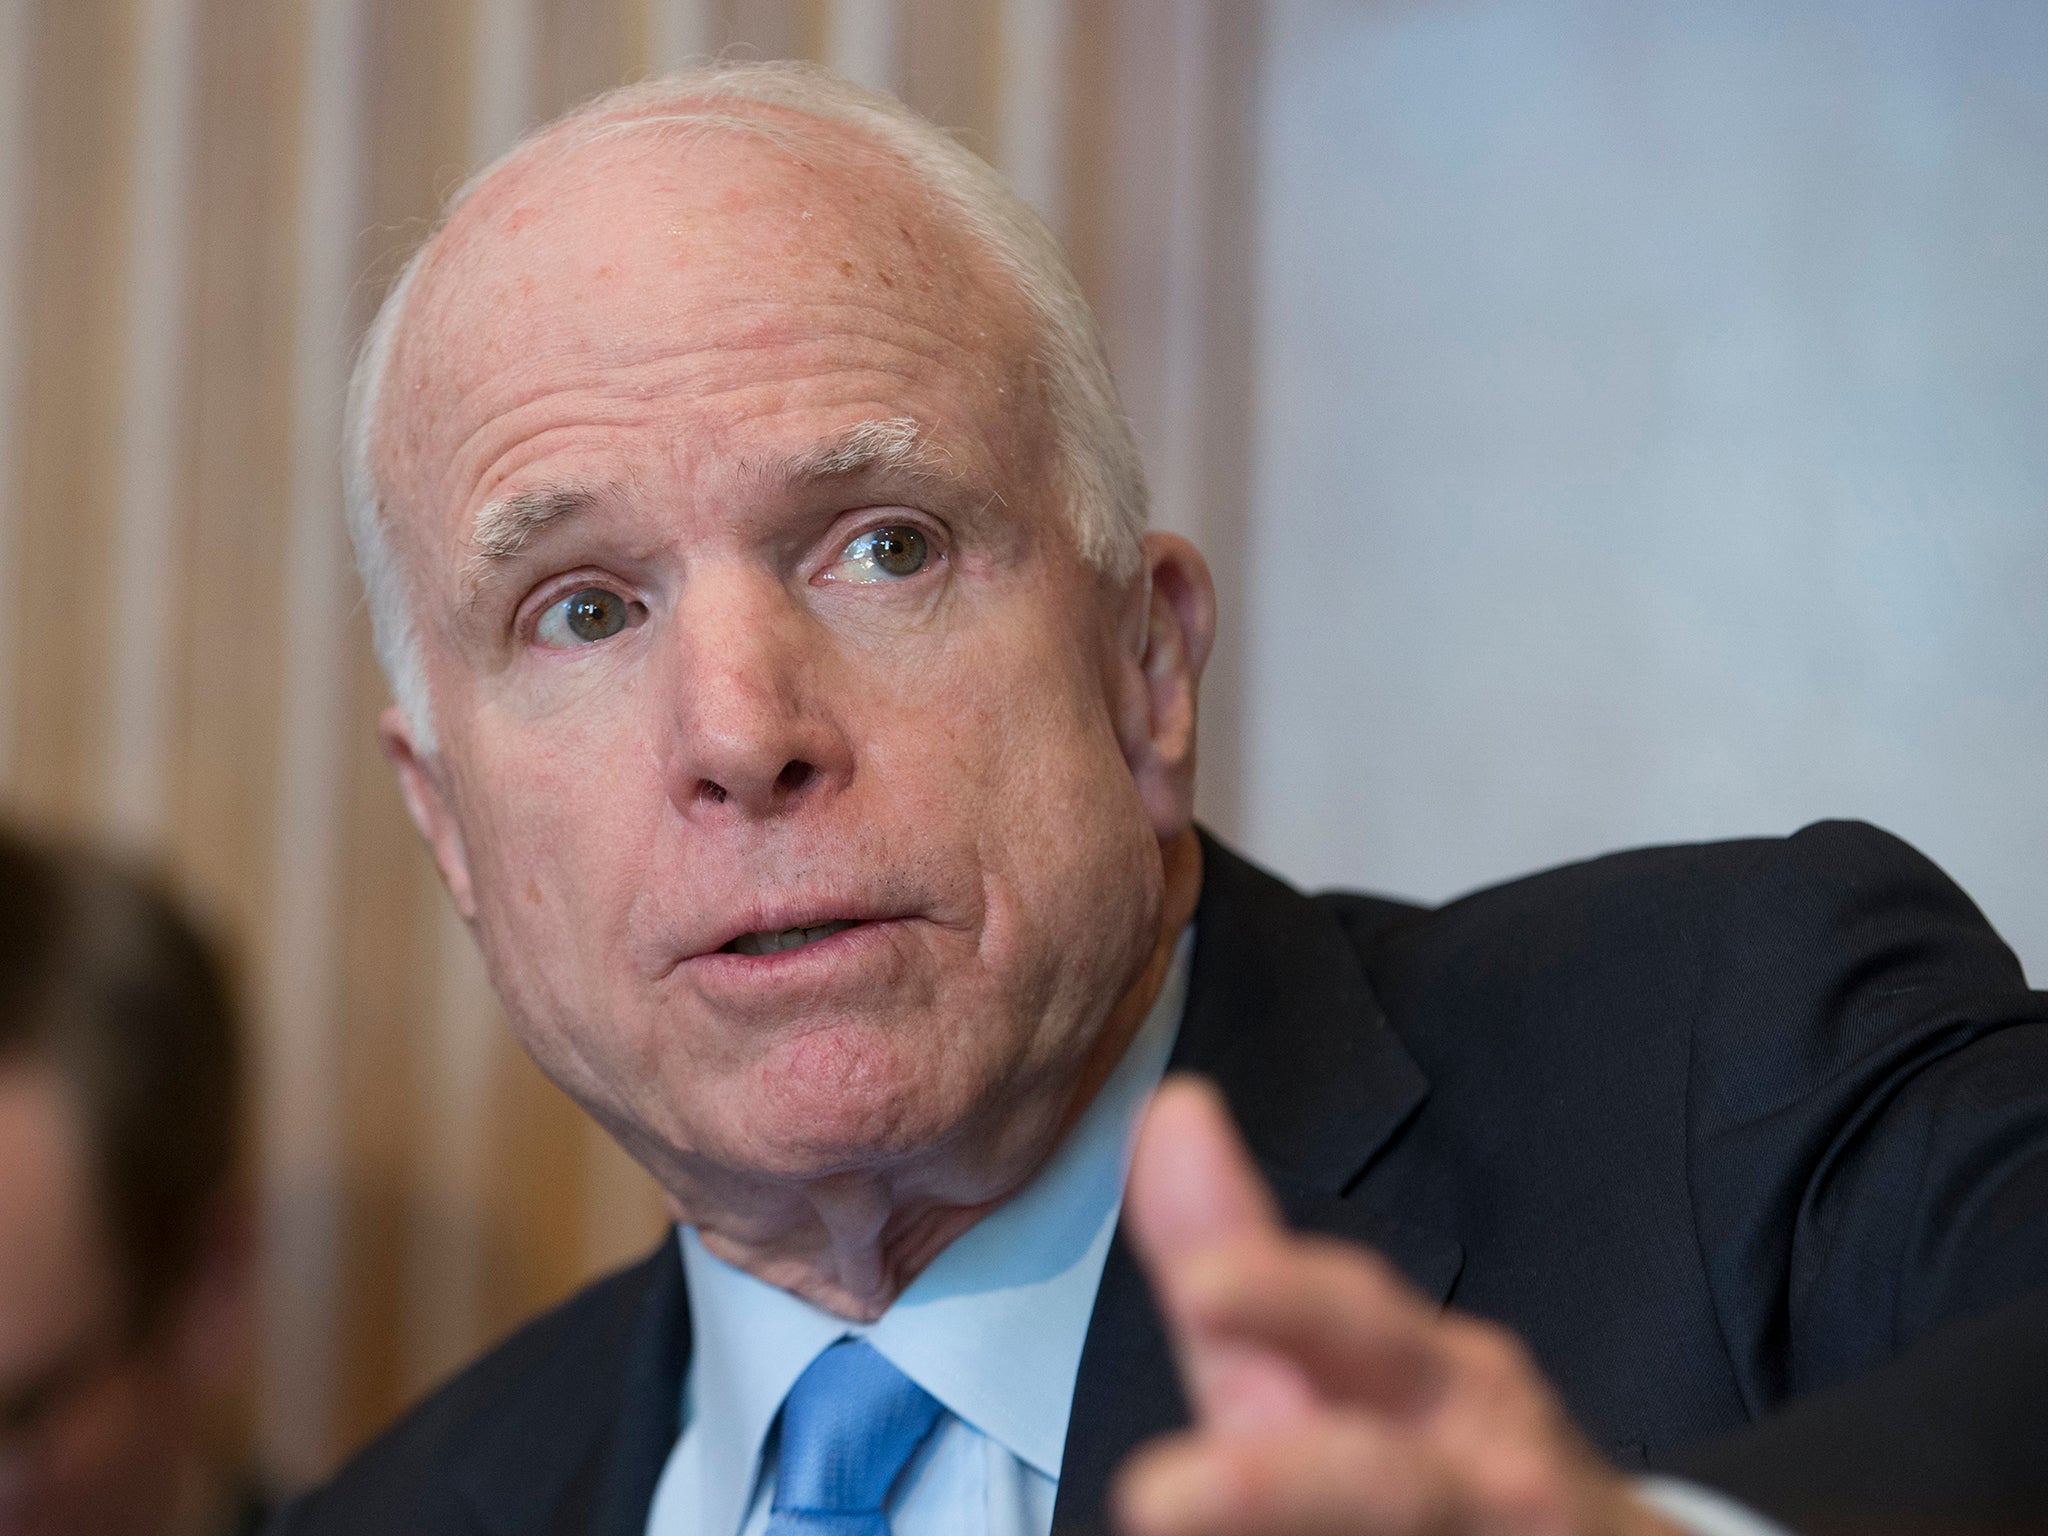 John McCain's treatment options could include chemotherapy